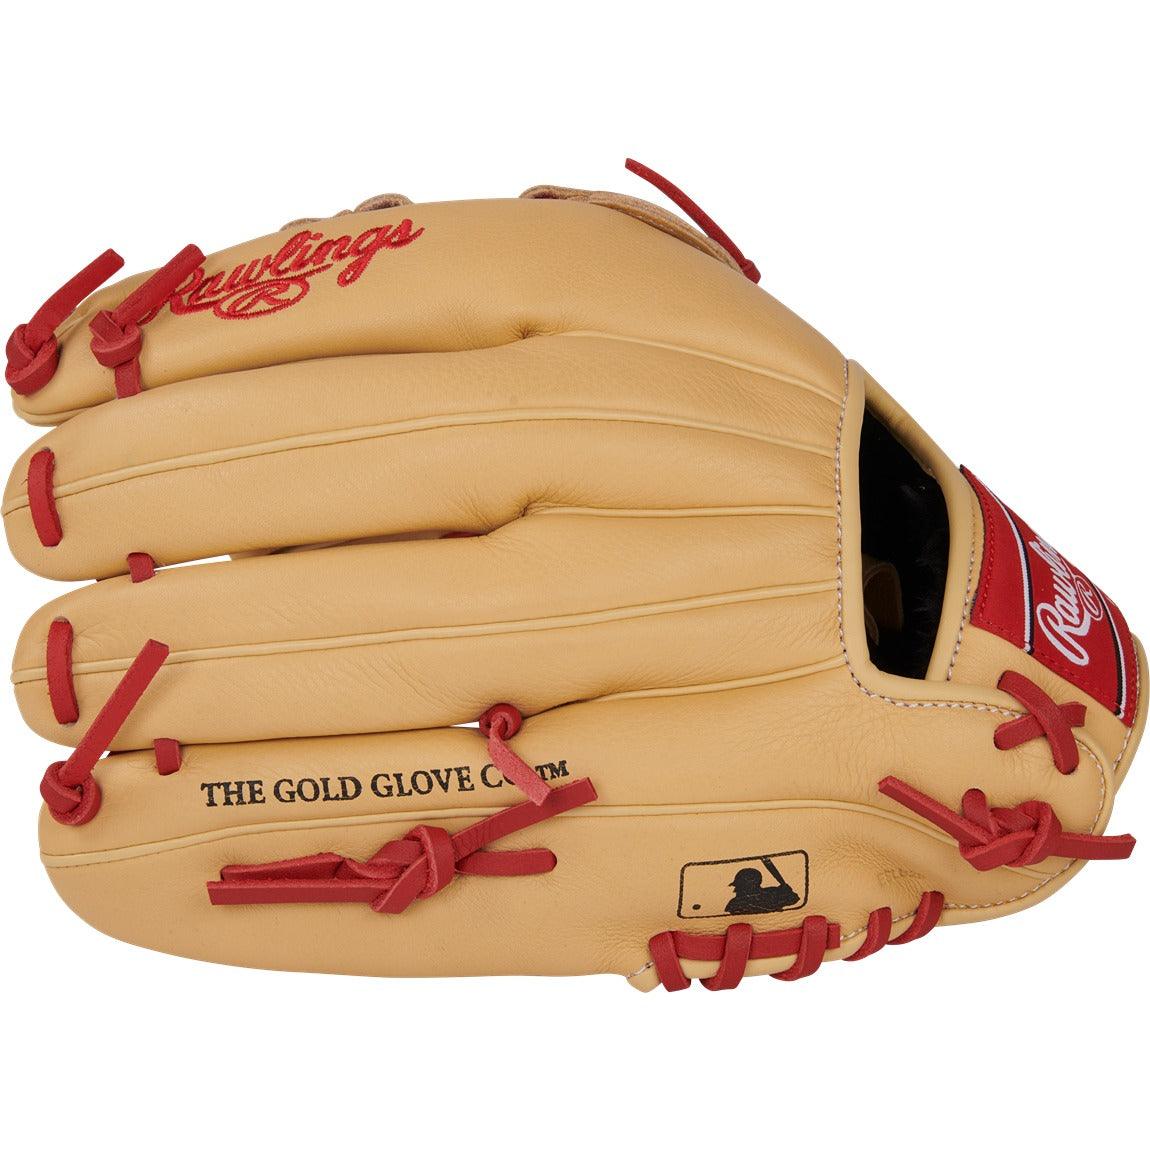 Select Pro Lite 12" Bryce Harper Baseball Glove - Youth - Sports Excellence